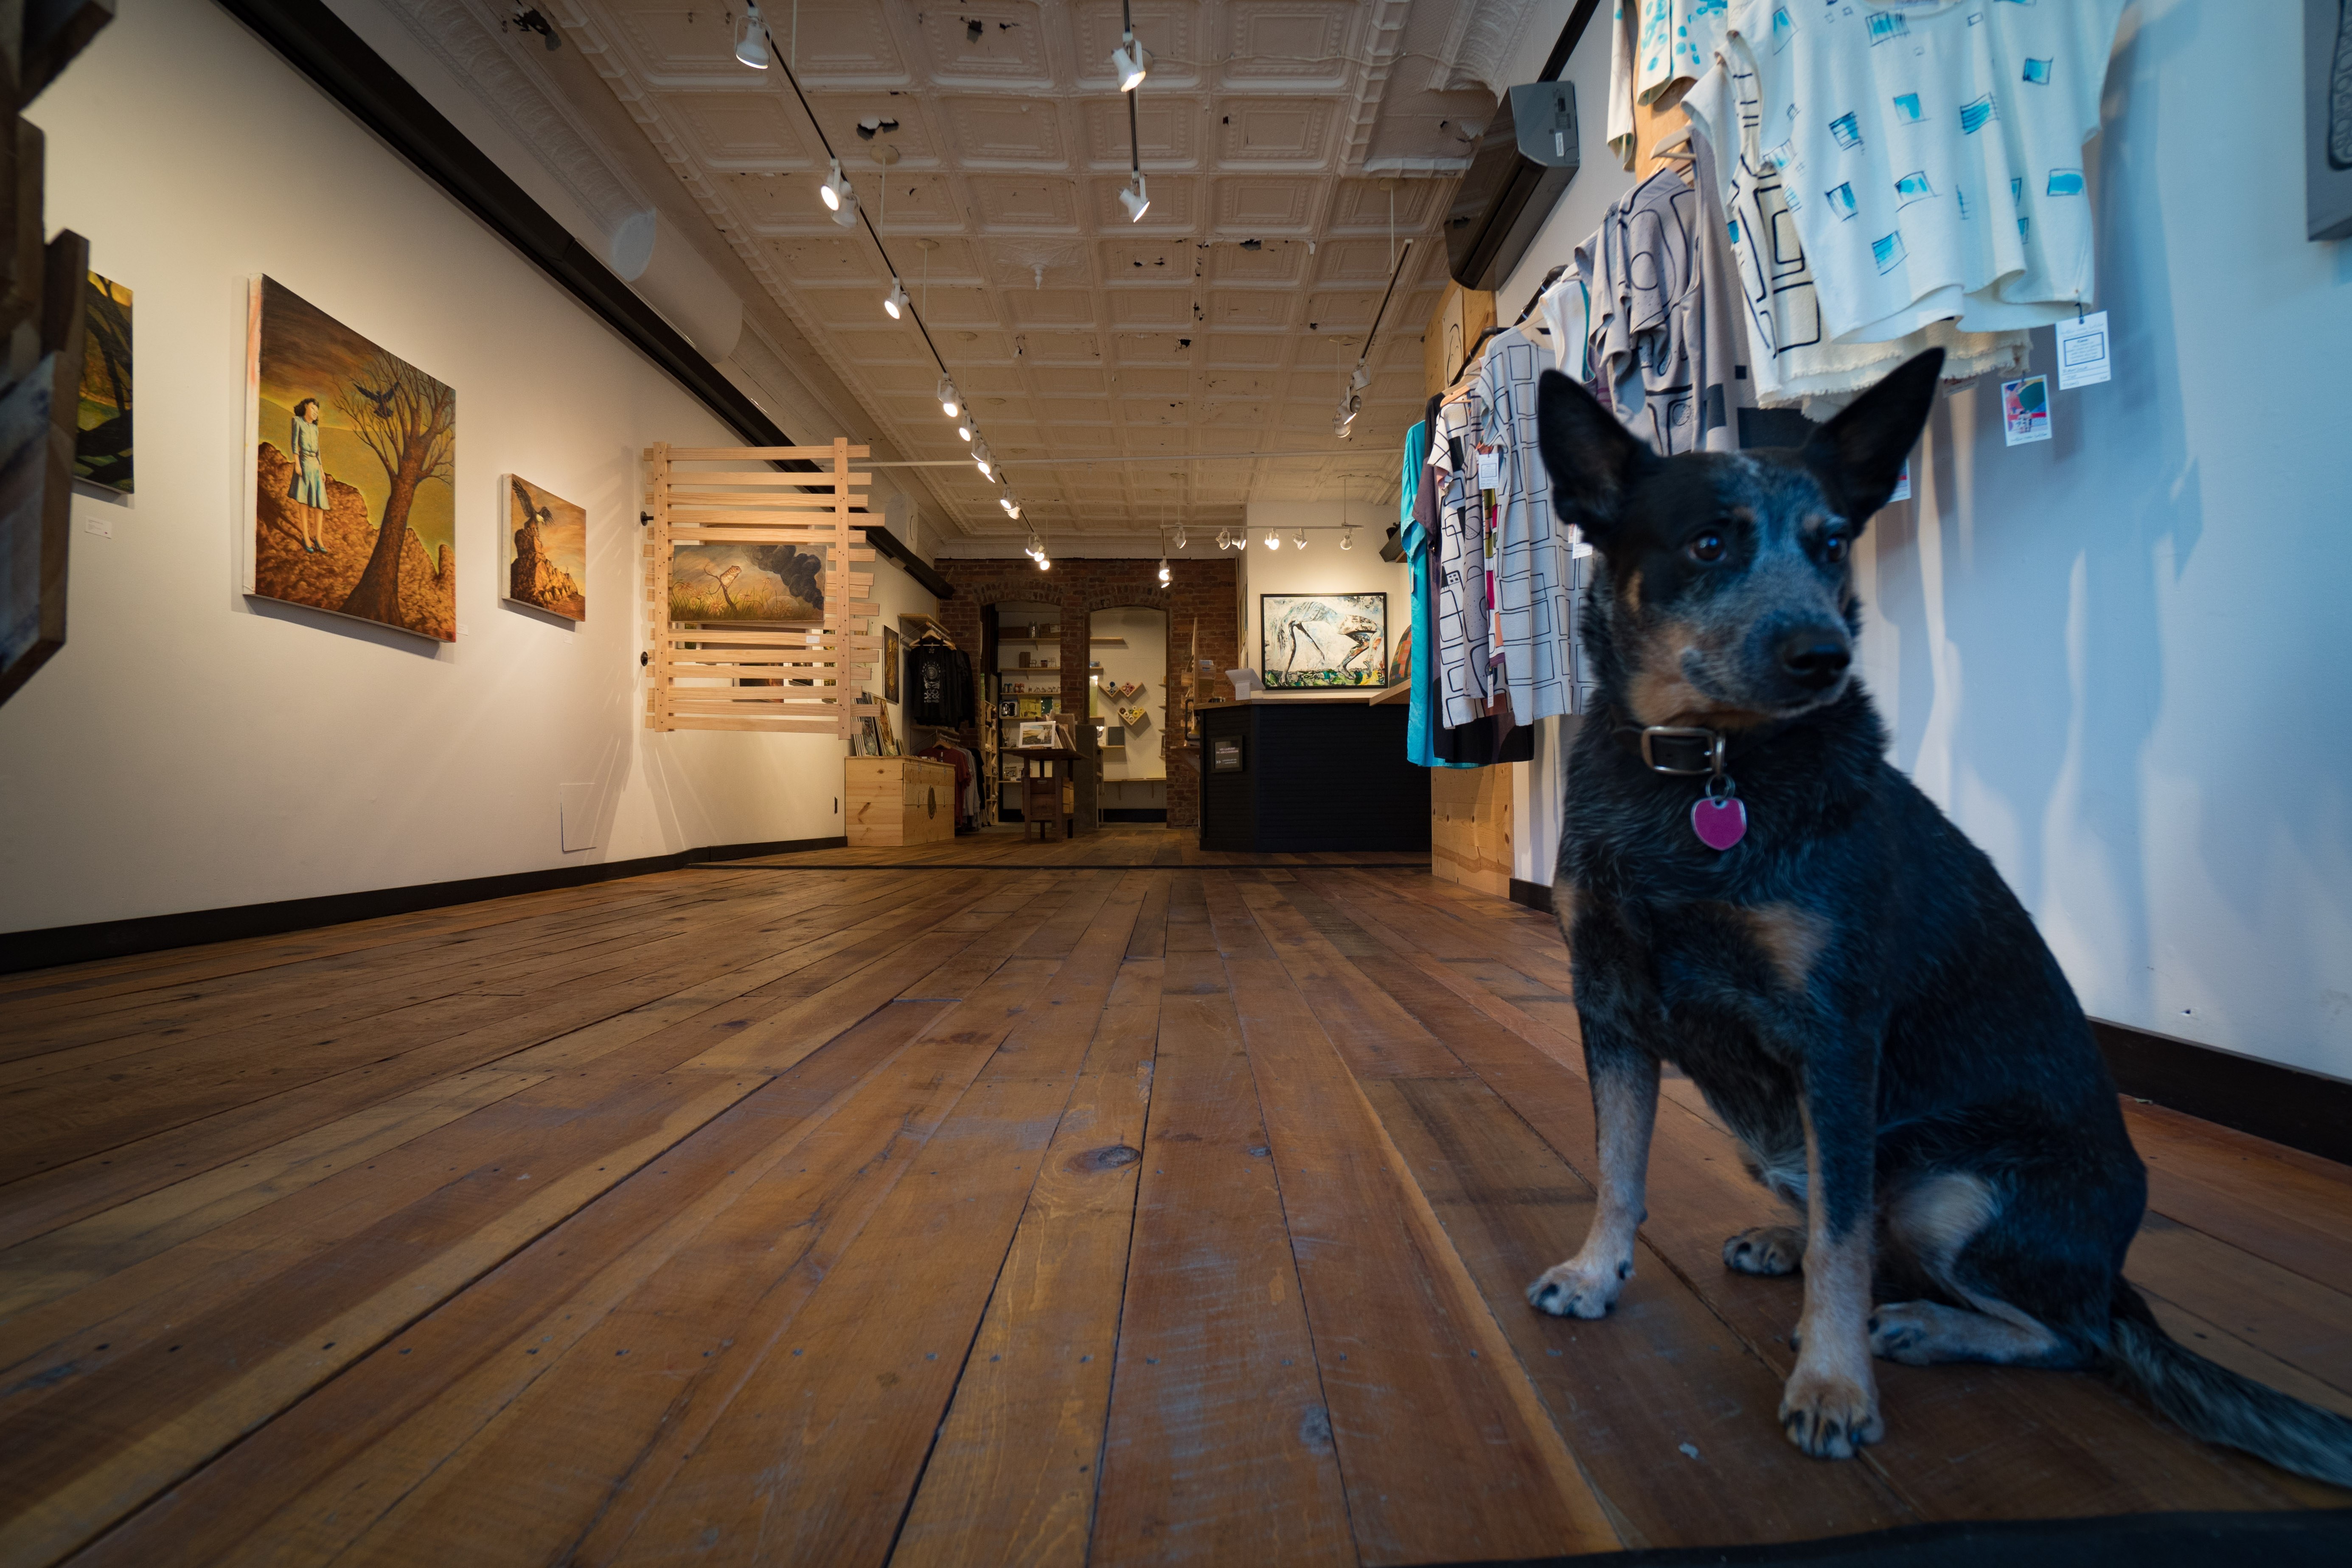 Contemporary art springs to life at Bloom art Gallery in historic Thomas, West Virginia.